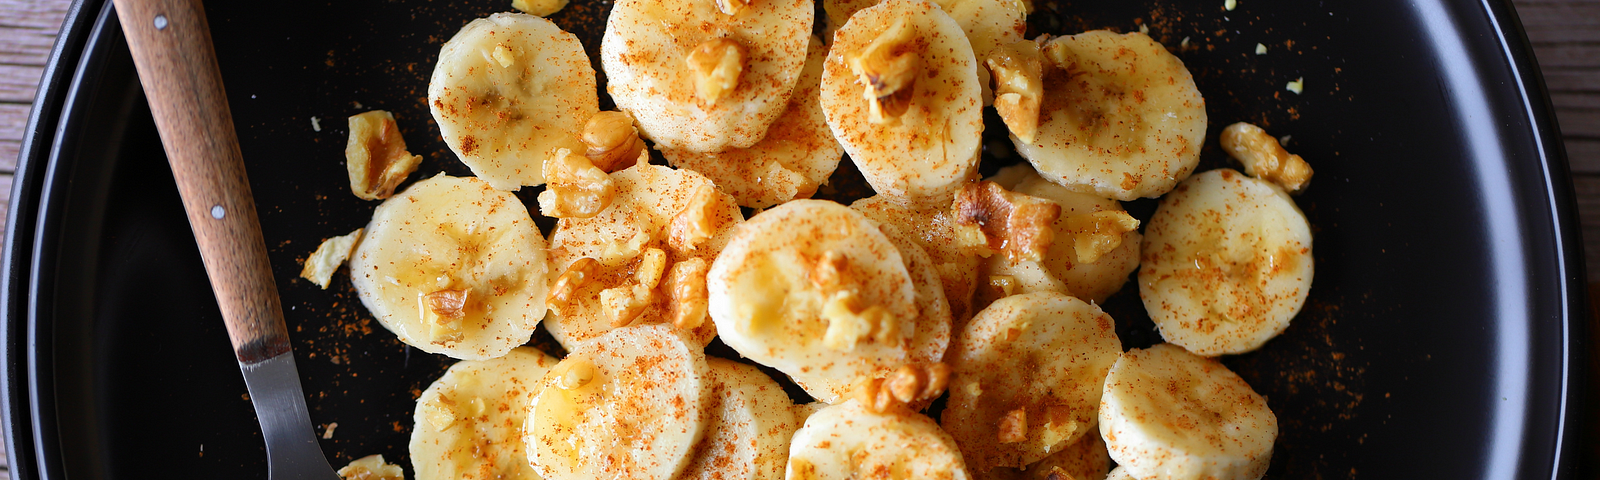 Healthier Snacking With Kids: Spiced Banana Crunch